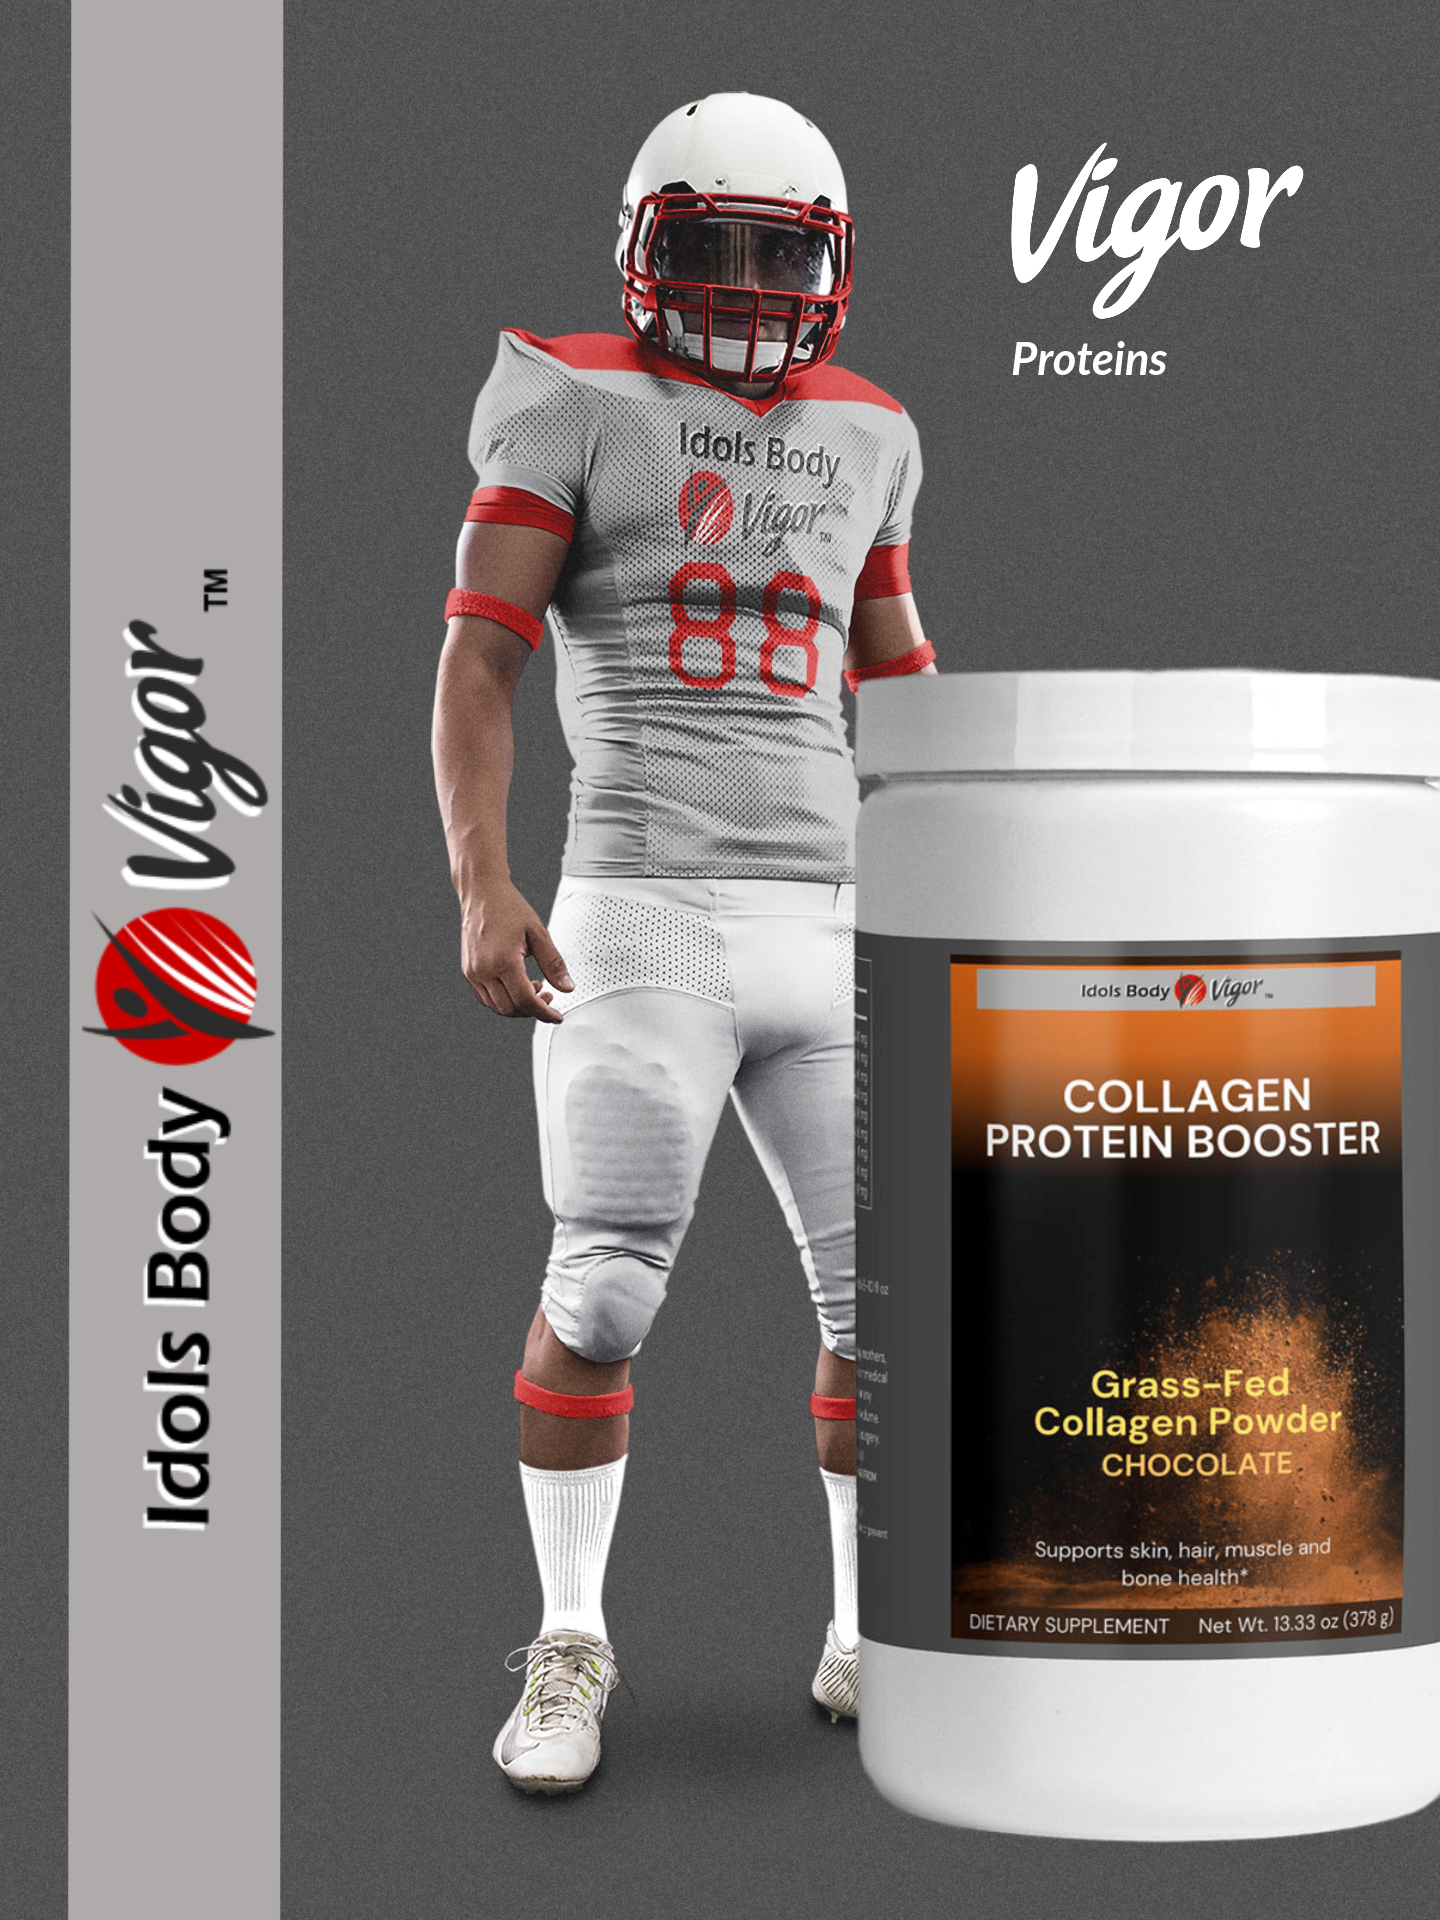 Vigor Proteins Promotions